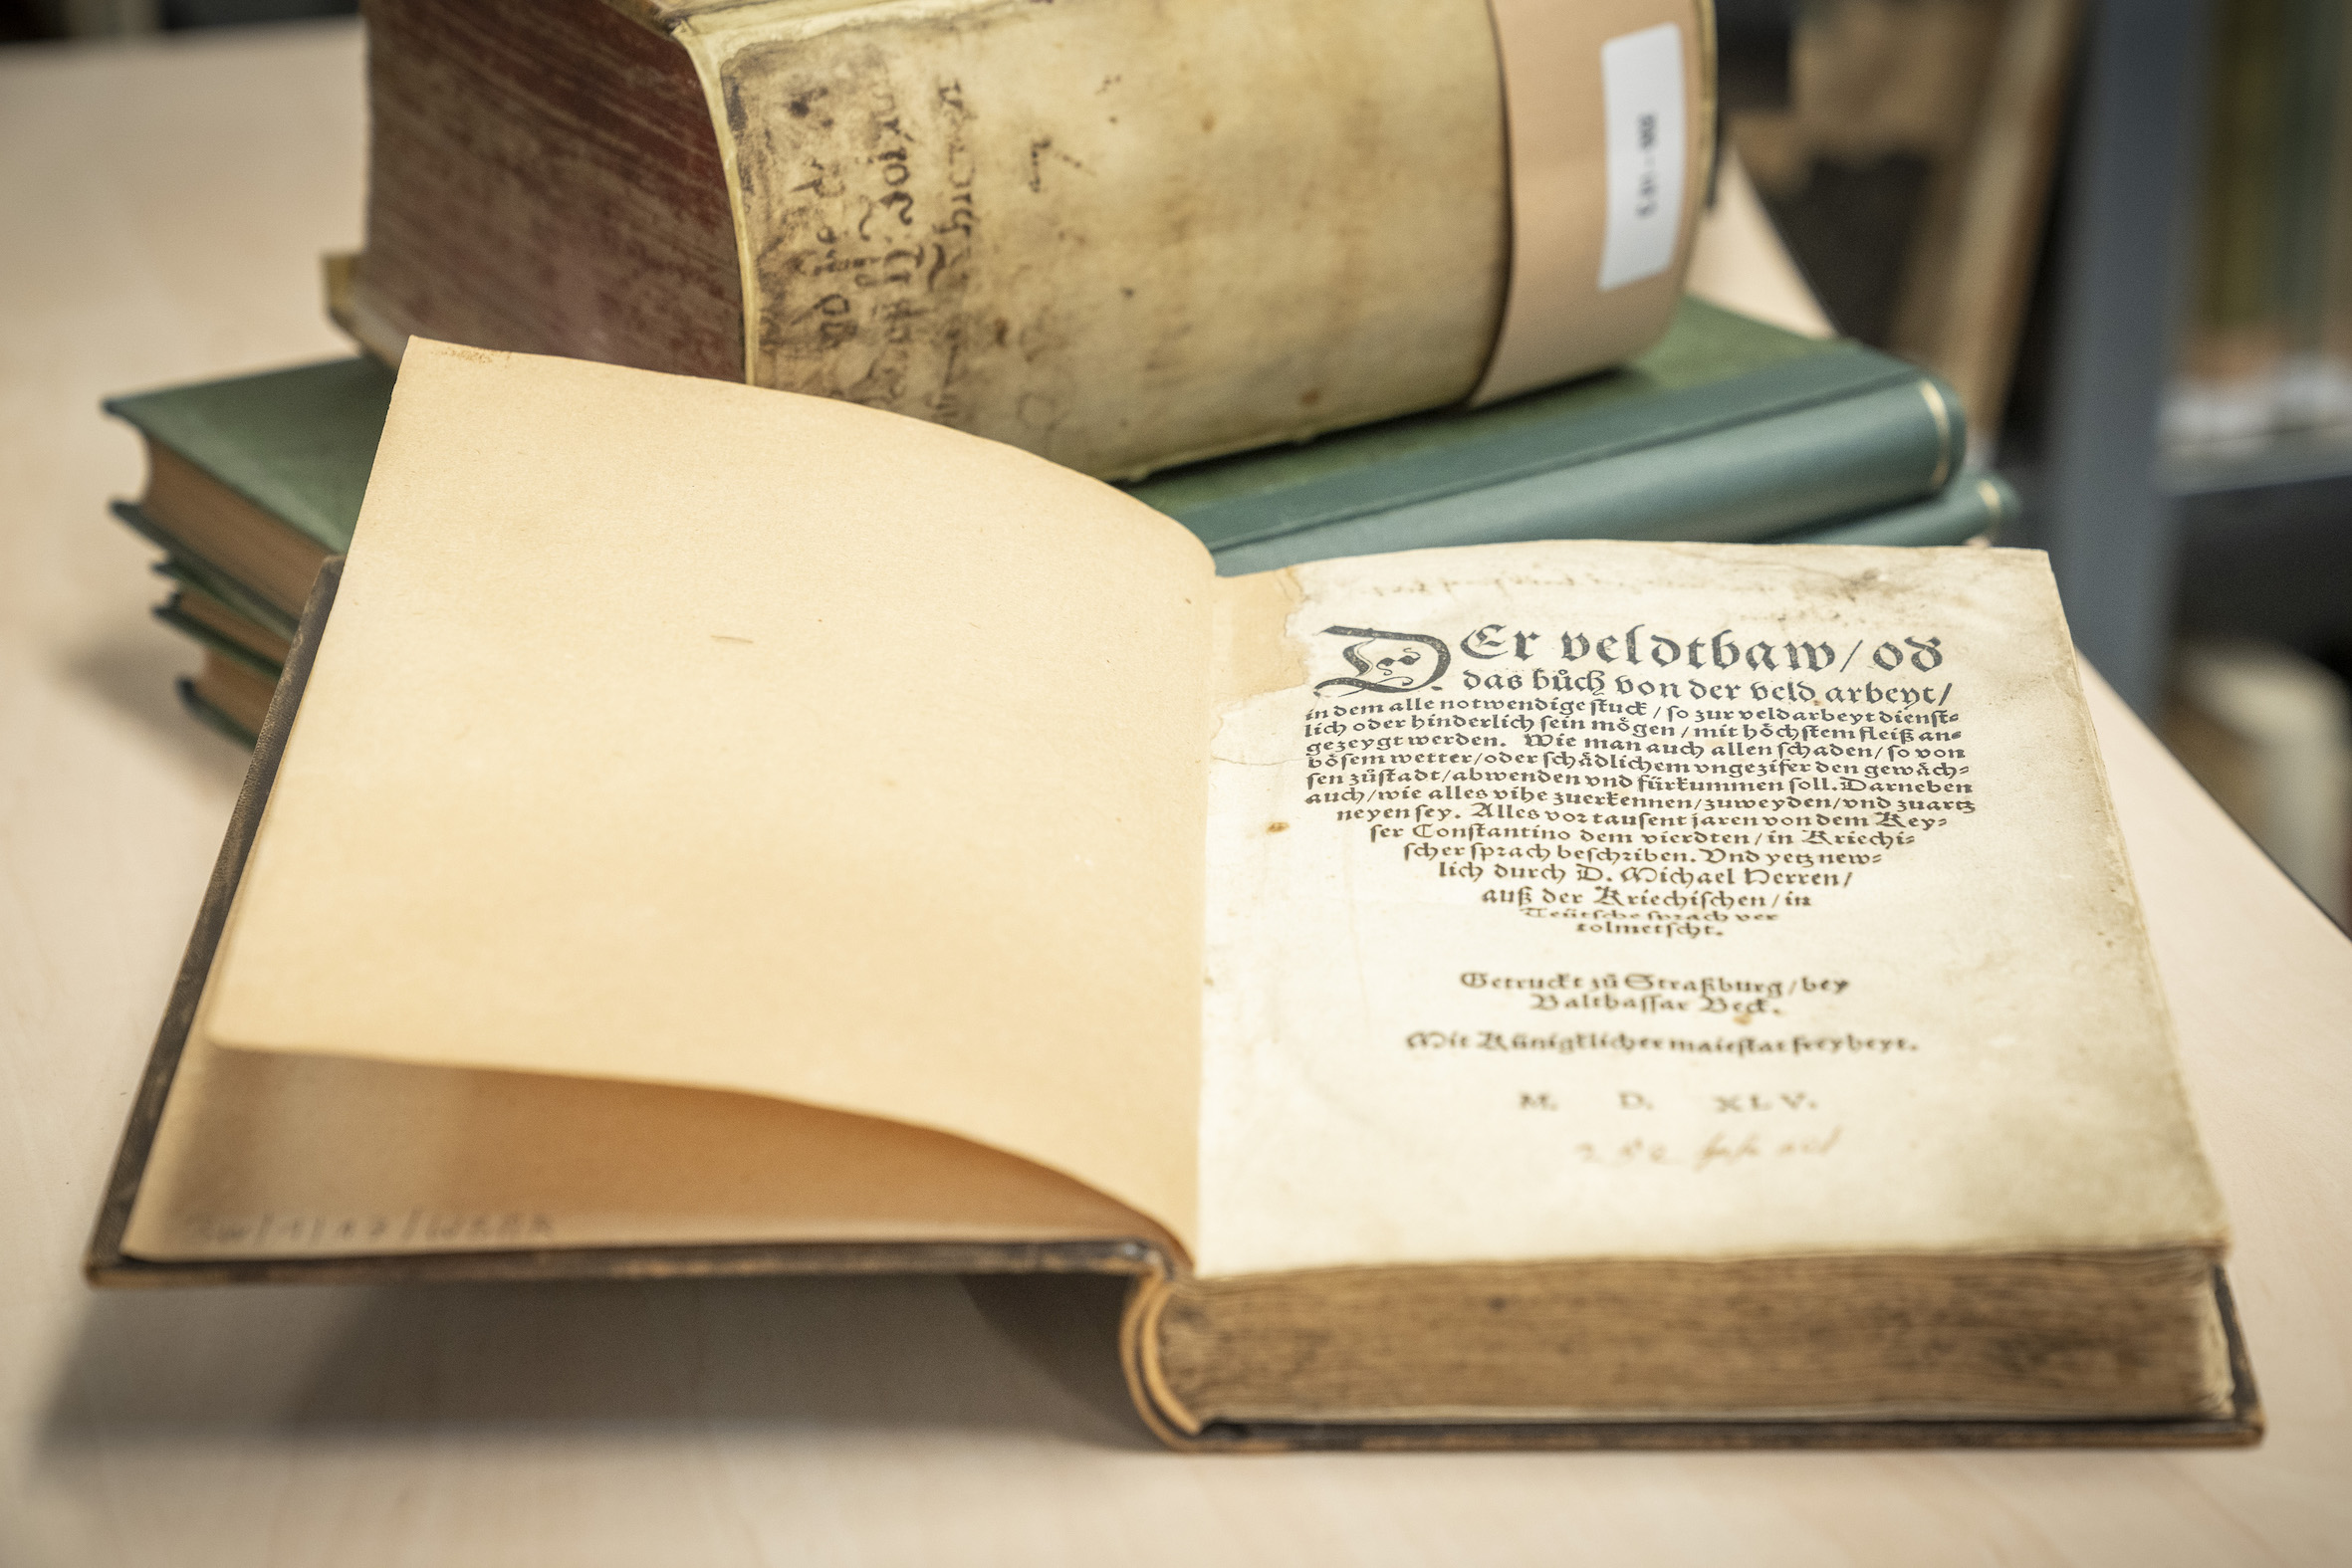 Title of the oldest book in the library - in the 16th century spelling: „Der Veldtbaw oder das Buoch von der veld arbeyt“ („The Field Construction - or: The Book of Field Work“).